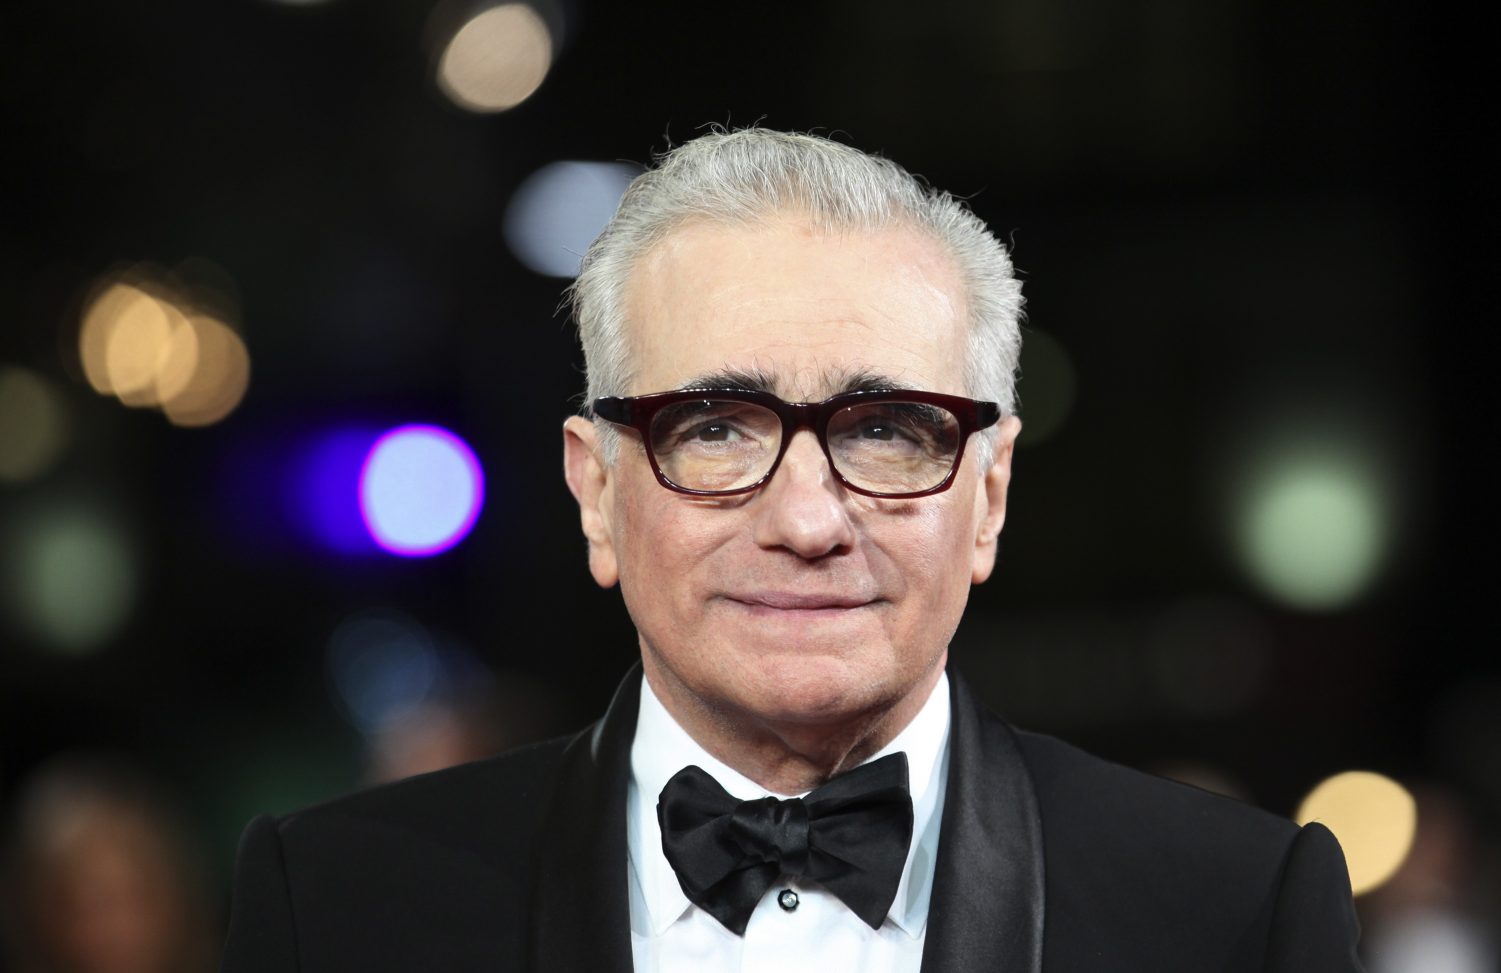 How Good Are You at Spelling Celebrity Names? Director Martin Scorsese arrives at The Royal Premiere of his film Hugo at the Odeon Leicester Square cinema in London